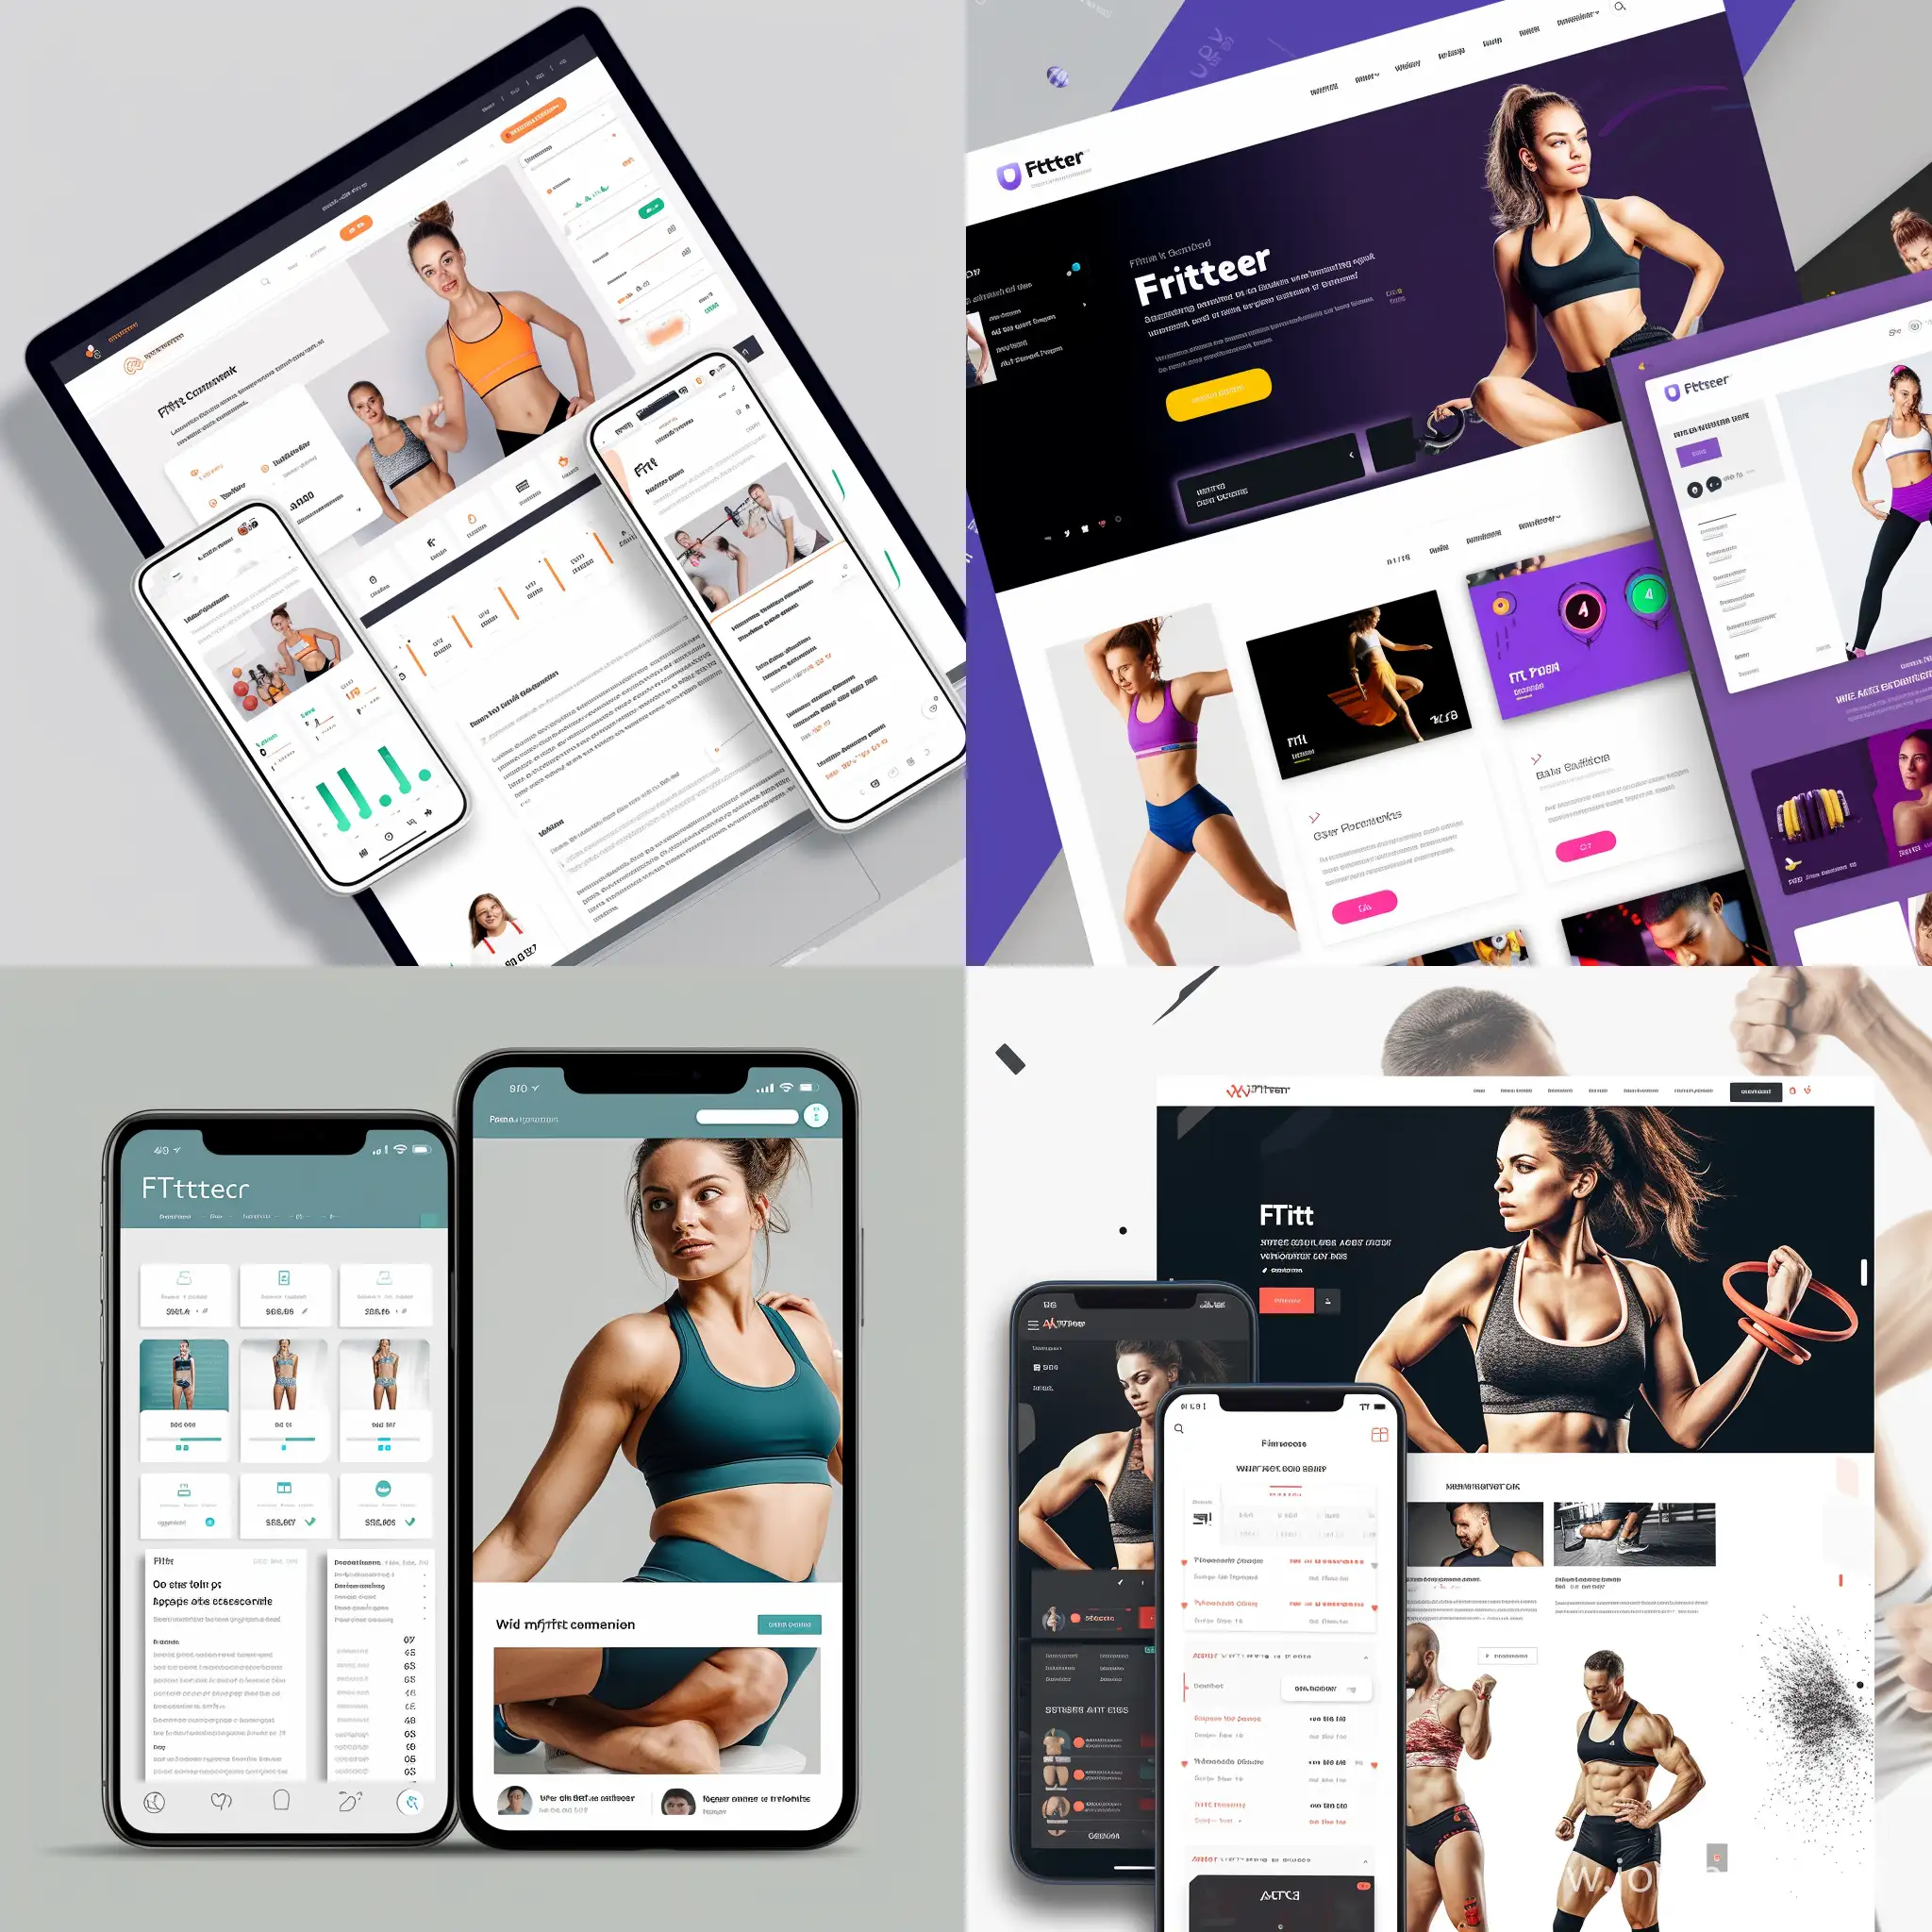 Create a page for my website, which is a web application for sports enthusiasts and coaches called "Fitster"